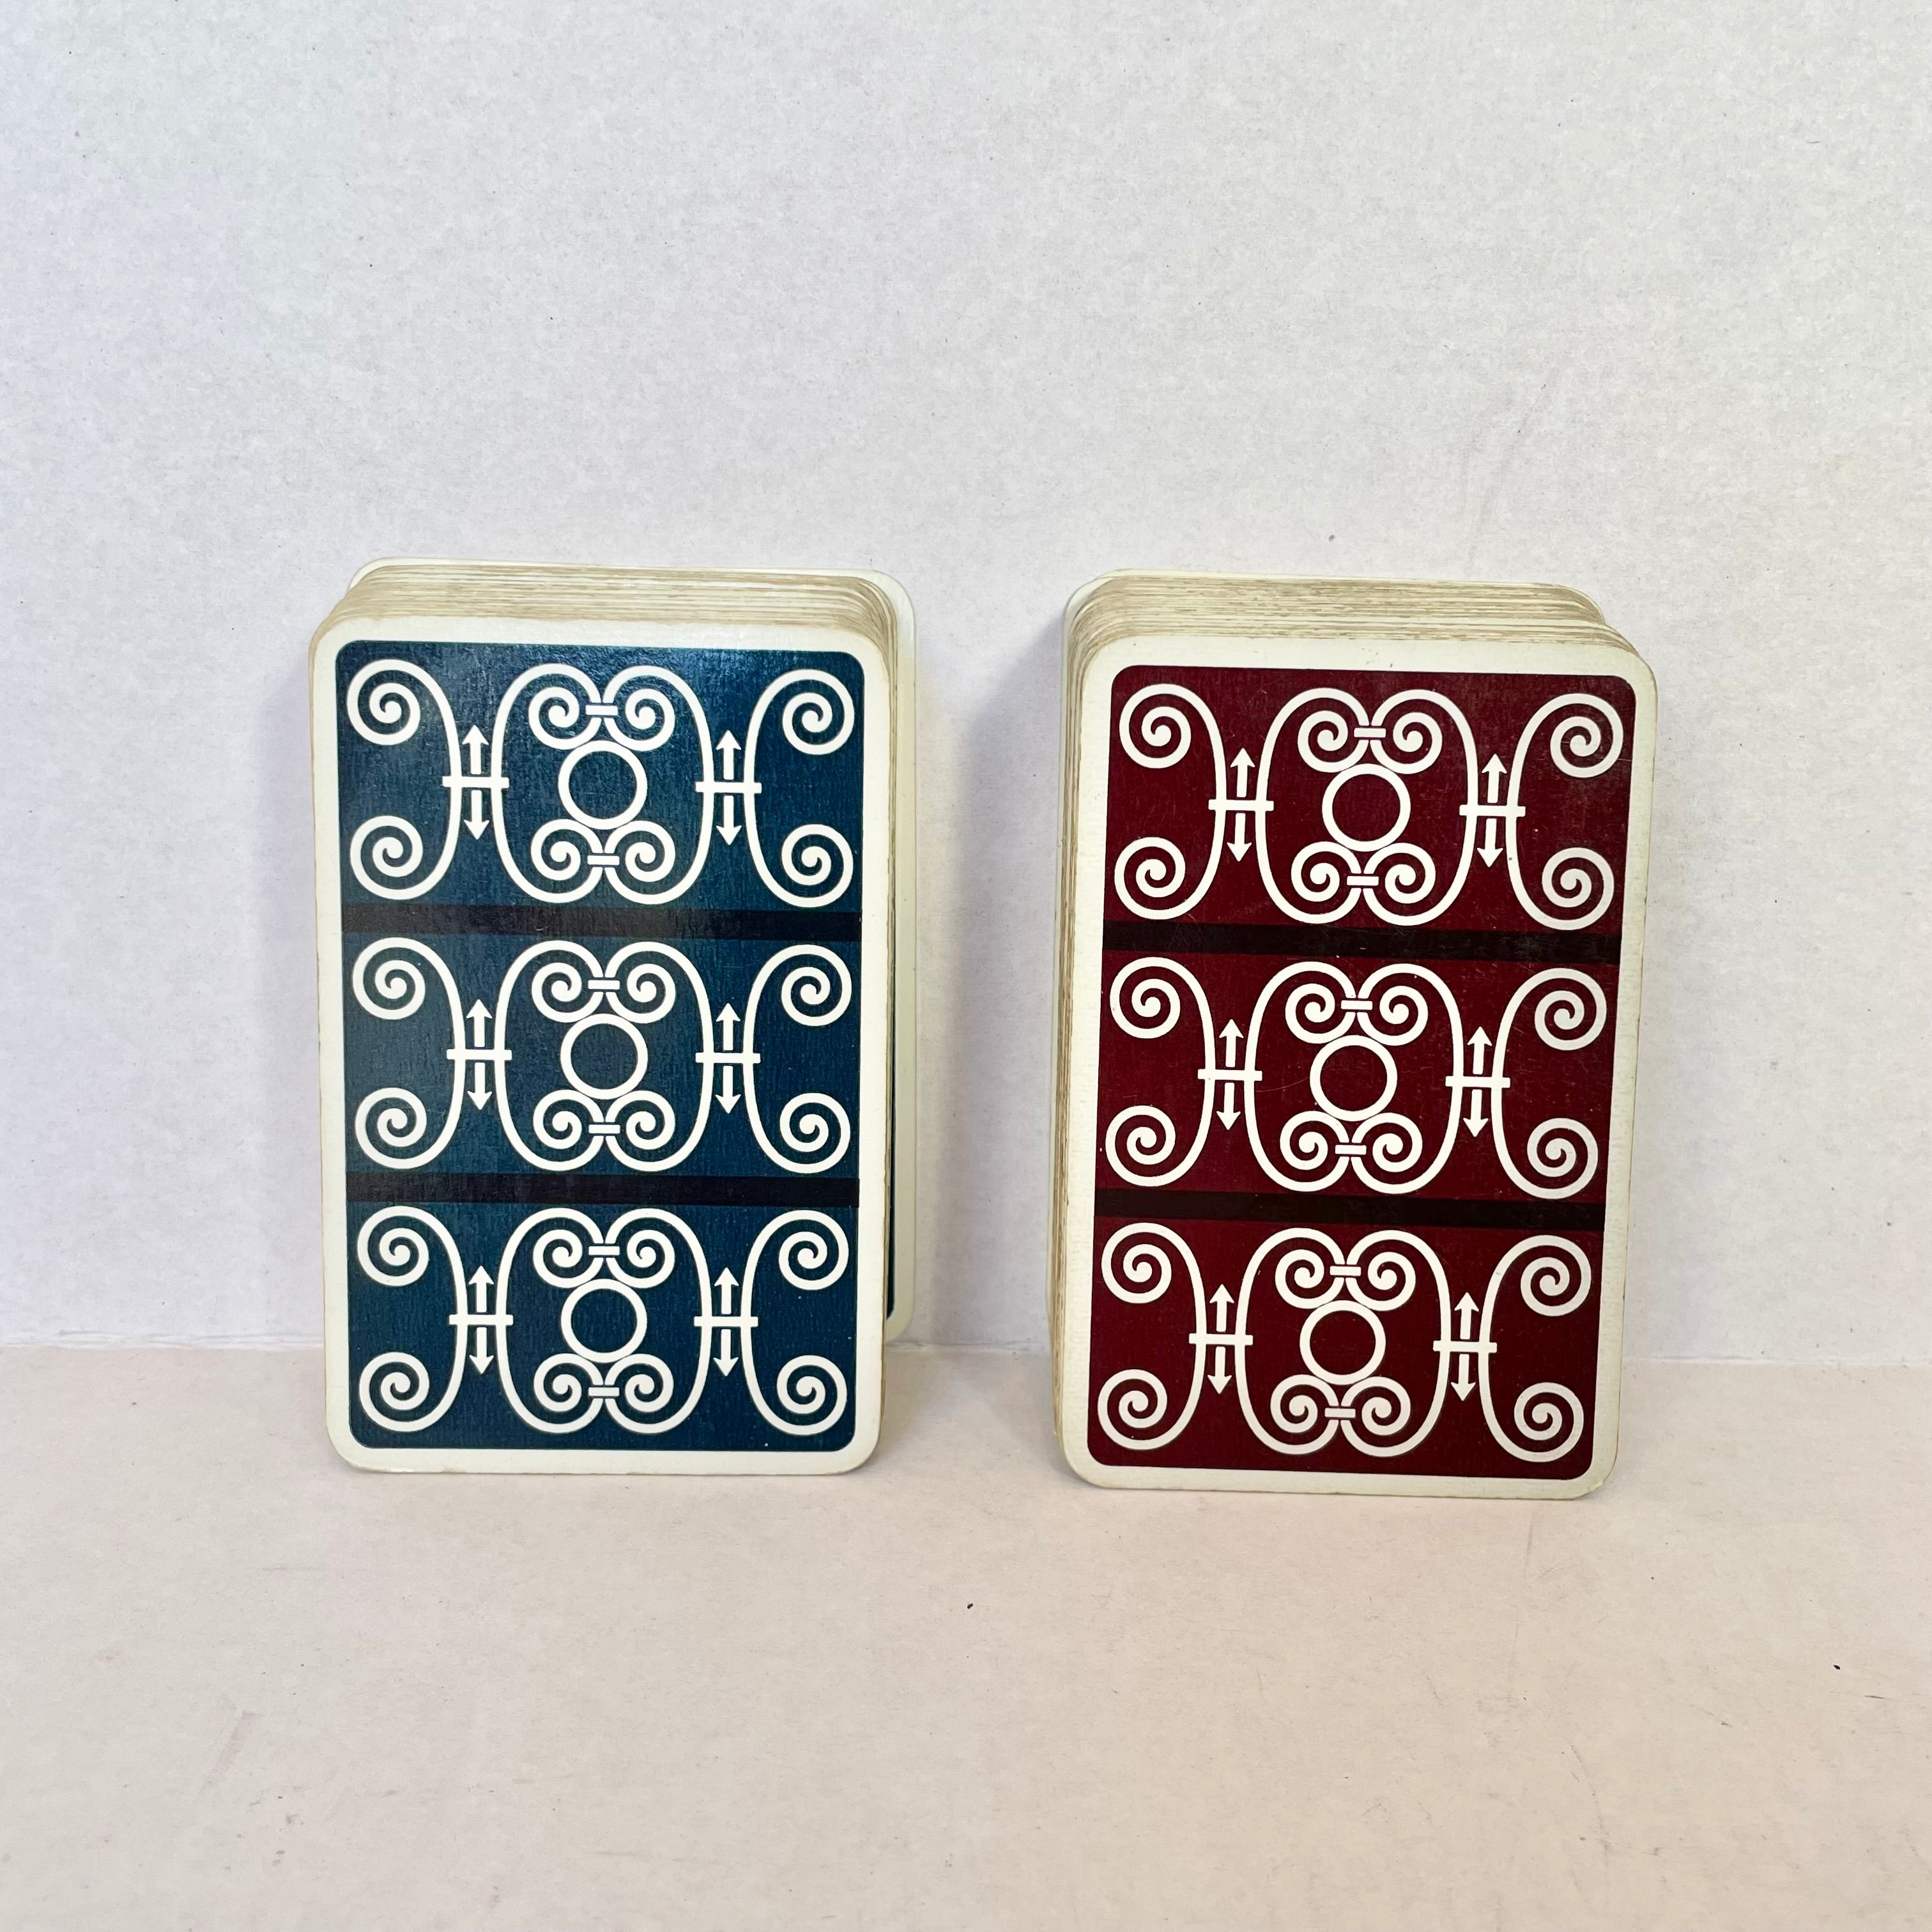 Vintage Hermes Playing Cards, Never Opened #168009